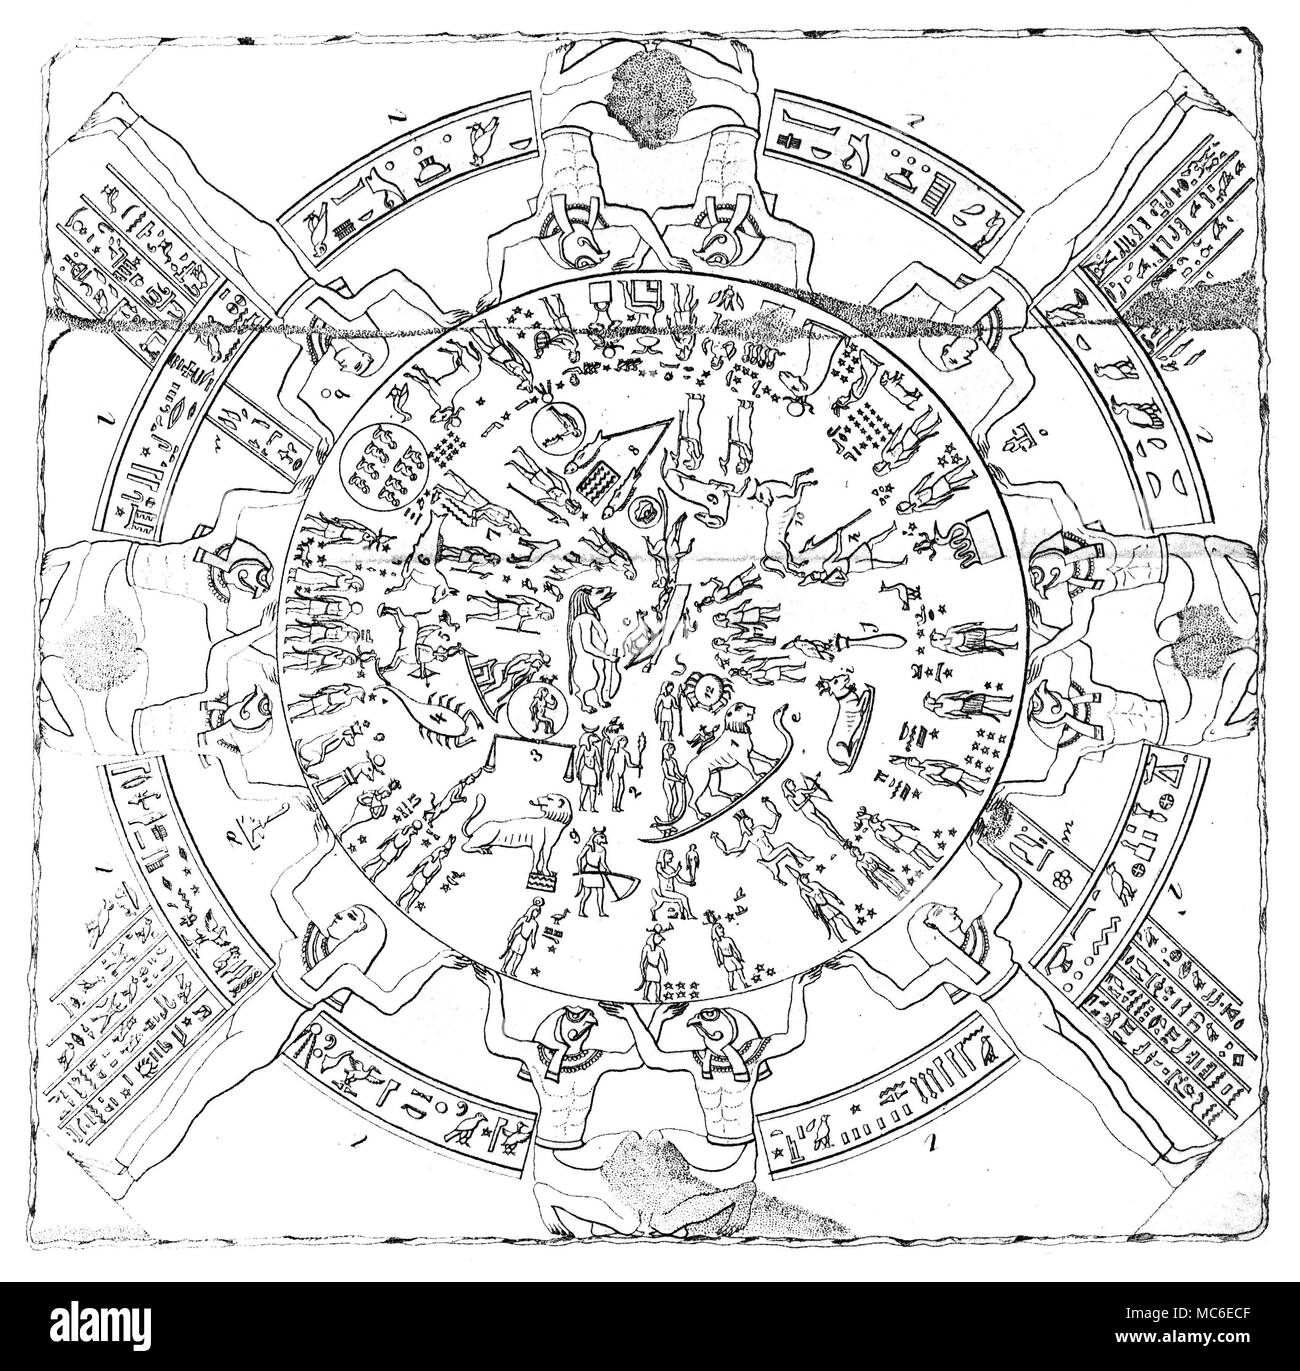 EGYPTIAN ASTROLOGY Engraving of the so-called 'zodiac' of Denderah - which is actually a planisphere, incorporating the twelve constellations, according to the late Egyptian (Ptolemaic) period. The planisphere is now in the Louvre, Paris (it was carried to France by Napoleon's soldiers), but a good copy of the original is still in situ, in the ceiling of the roof Temple of the Temple of Hathor, at Denderah, Egypt. Stock Photo